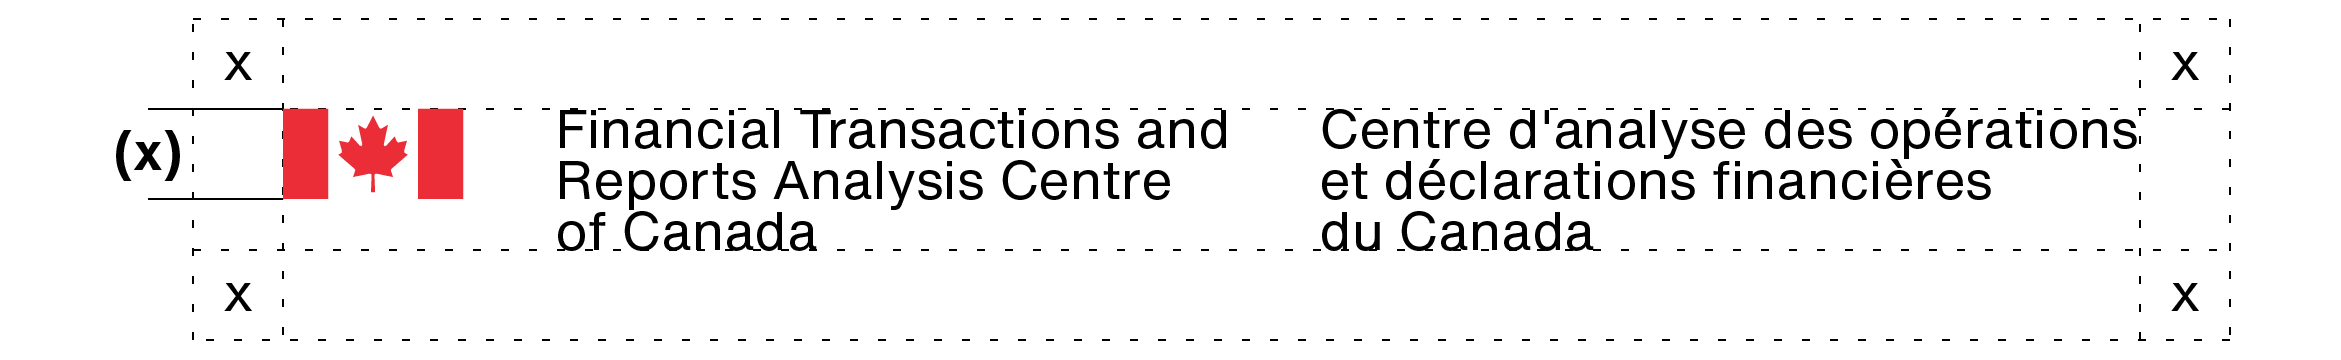 Flag signature for the Financial Transactions and Reports Analysis Centre of Canada (a 3 line flag signature). The clear space required around a 3 line flag signature is explained in the text above.